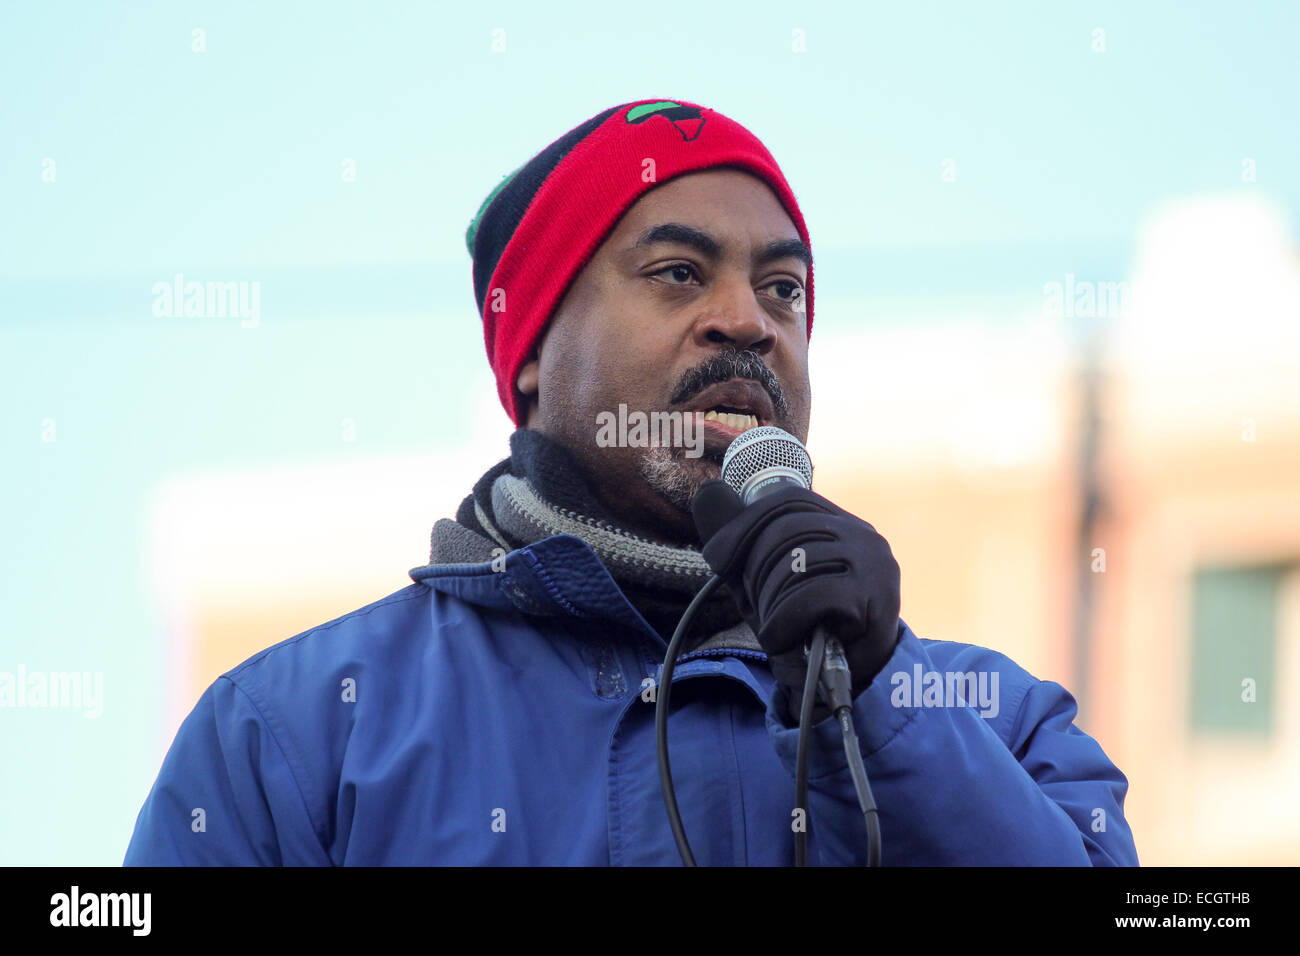 Boston, Massachusetts, USA. 13th December, 2014. A man speaks during the Millions March rally in Boston, Massachusetts, USA. The protest, like those in other cities throughout the United States on this day, is in response to recent grand jury verdicts not indicting the police officers who  killed unarmed black men Michael Brown and Eric Garner, and to the longstanding problems of racism and police brutality. Credit:  Susan Pease/Alamy Live News Stock Photo